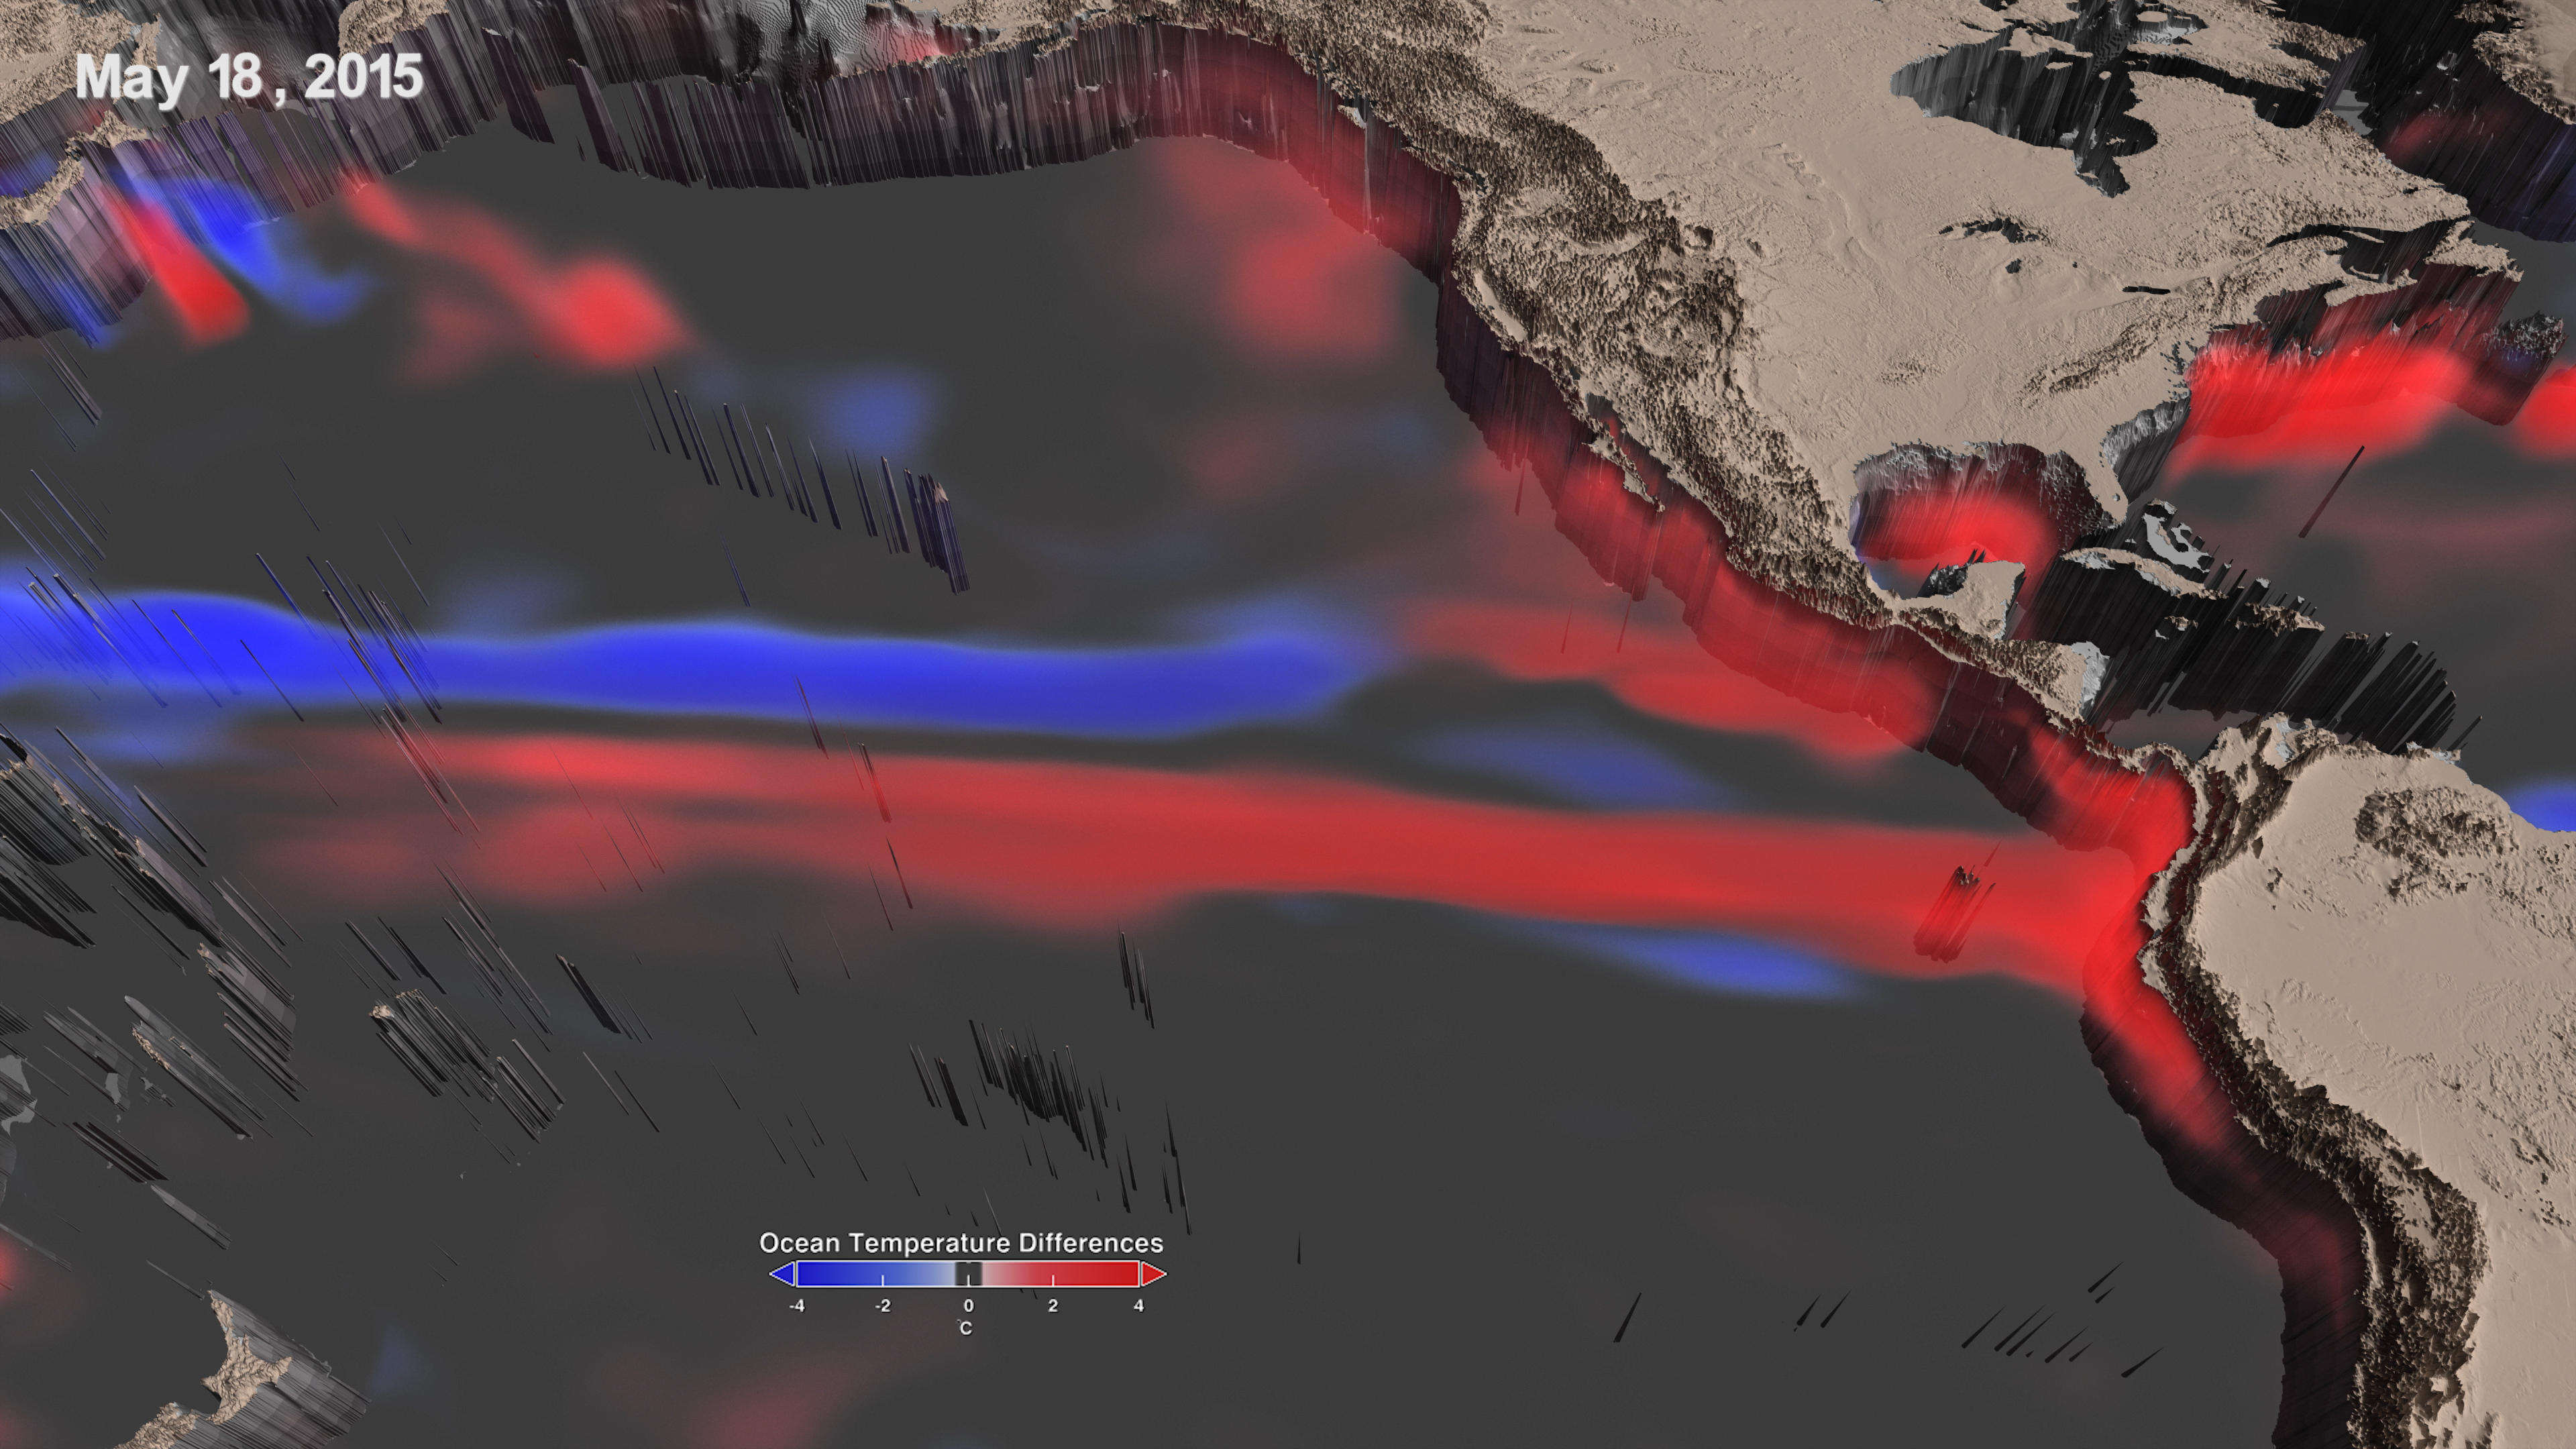 Scientists at NASA's Goddard Space Flight Center have combined ocean measurements with cutting-edge supercomputer simulations to analyze the 2015-2016 El Niño in three dimensions.  This visualization looks at the top 225 meters of the ocean, showing warmer than normal water in red, colder than normal water in blue.  In the second half, current information is included, with east-flowing currents in yellow and west-flowing currents in white.Music: Bourrée from Handel's Water MusicWatch this video on the NASA Goddard YouTube channel.